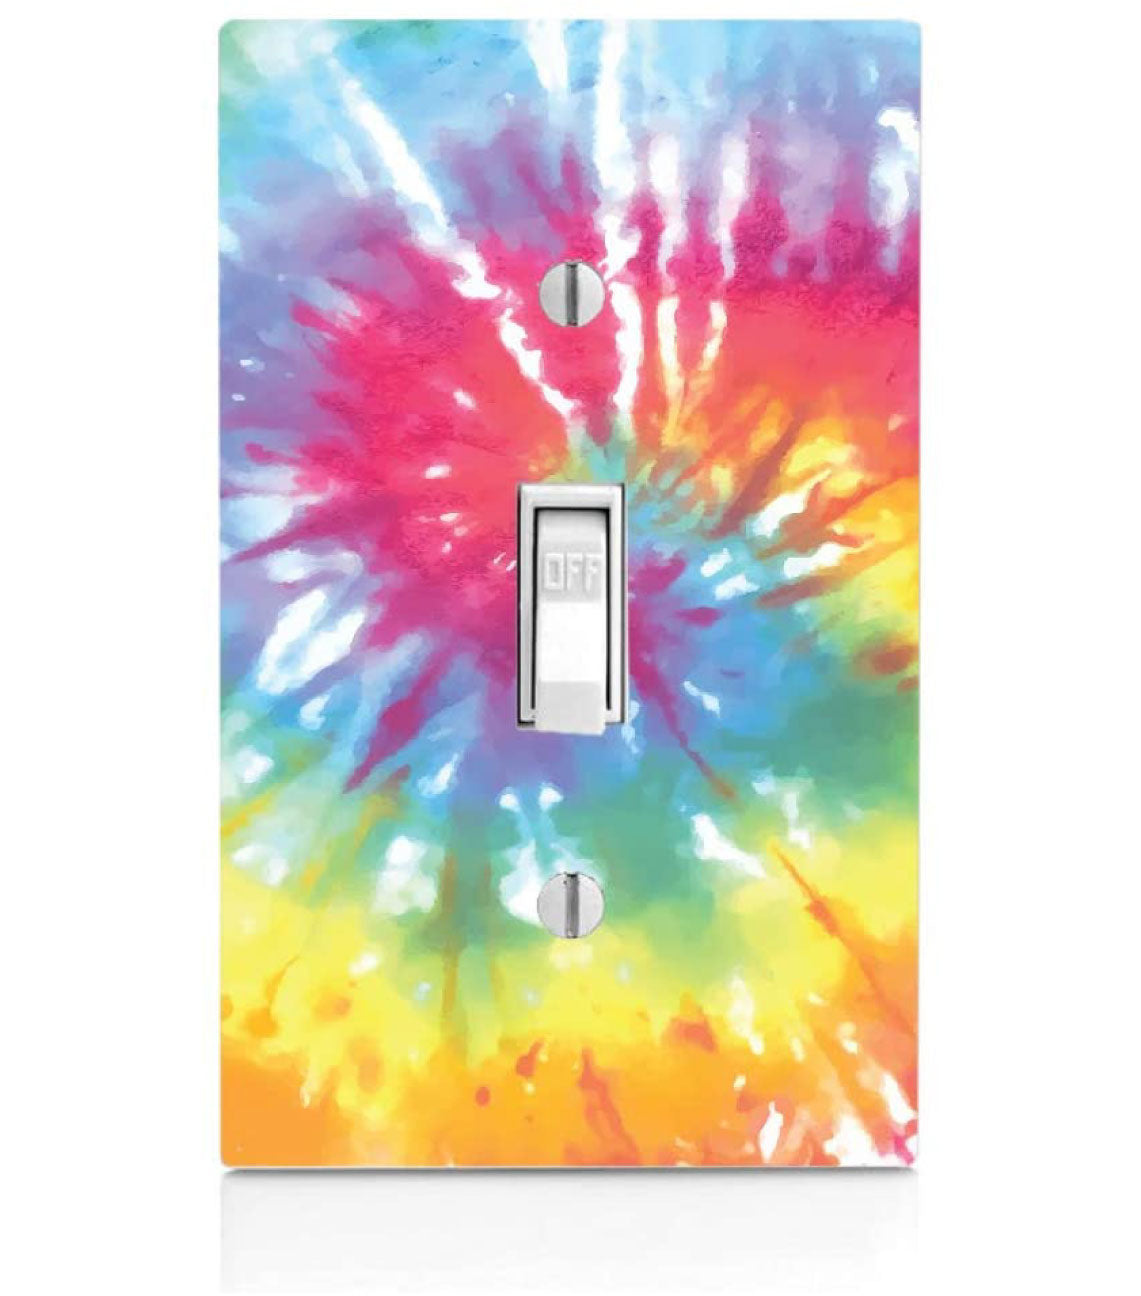 Tie Dye, Plastic Single Toggle Light Plate Switch Wall Plate, 2.75 x 4.5 inches